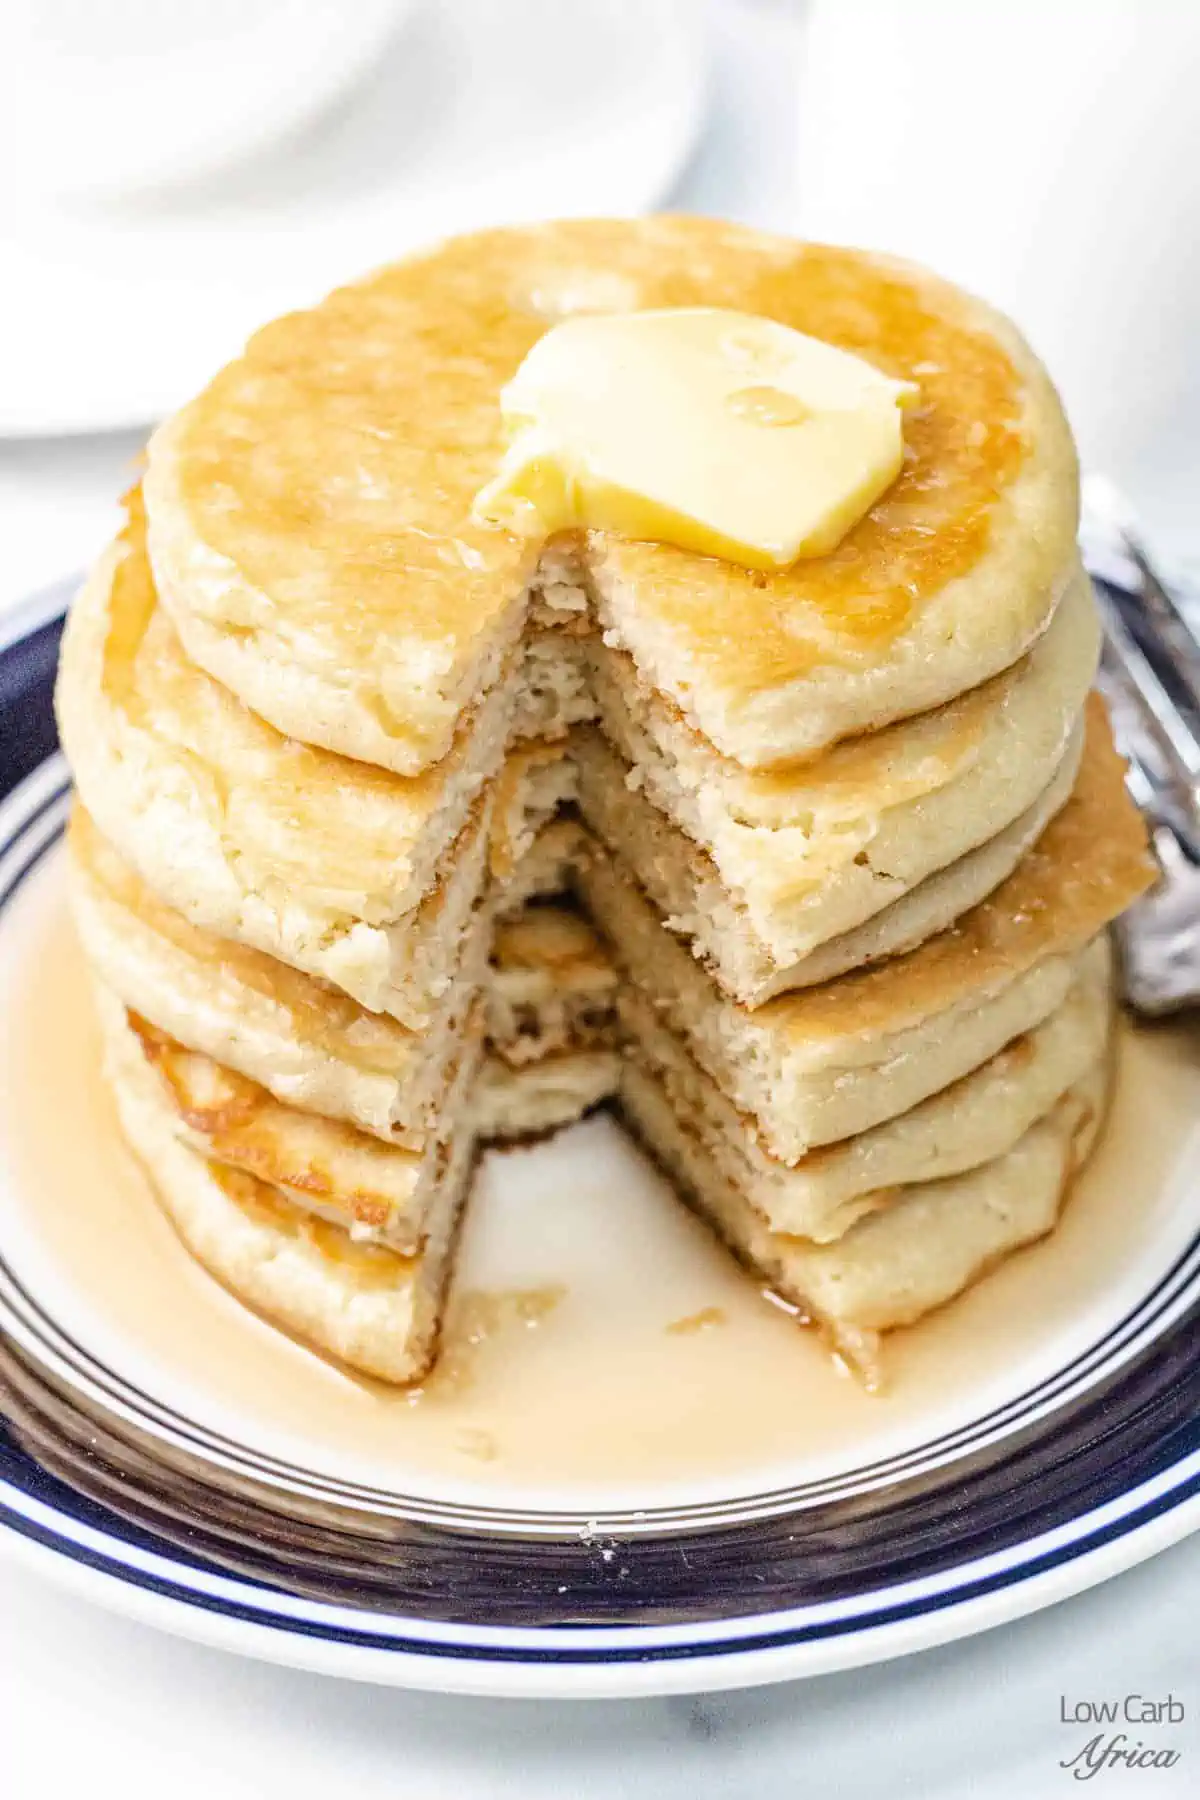 keto pancakes sliced and ready to eat